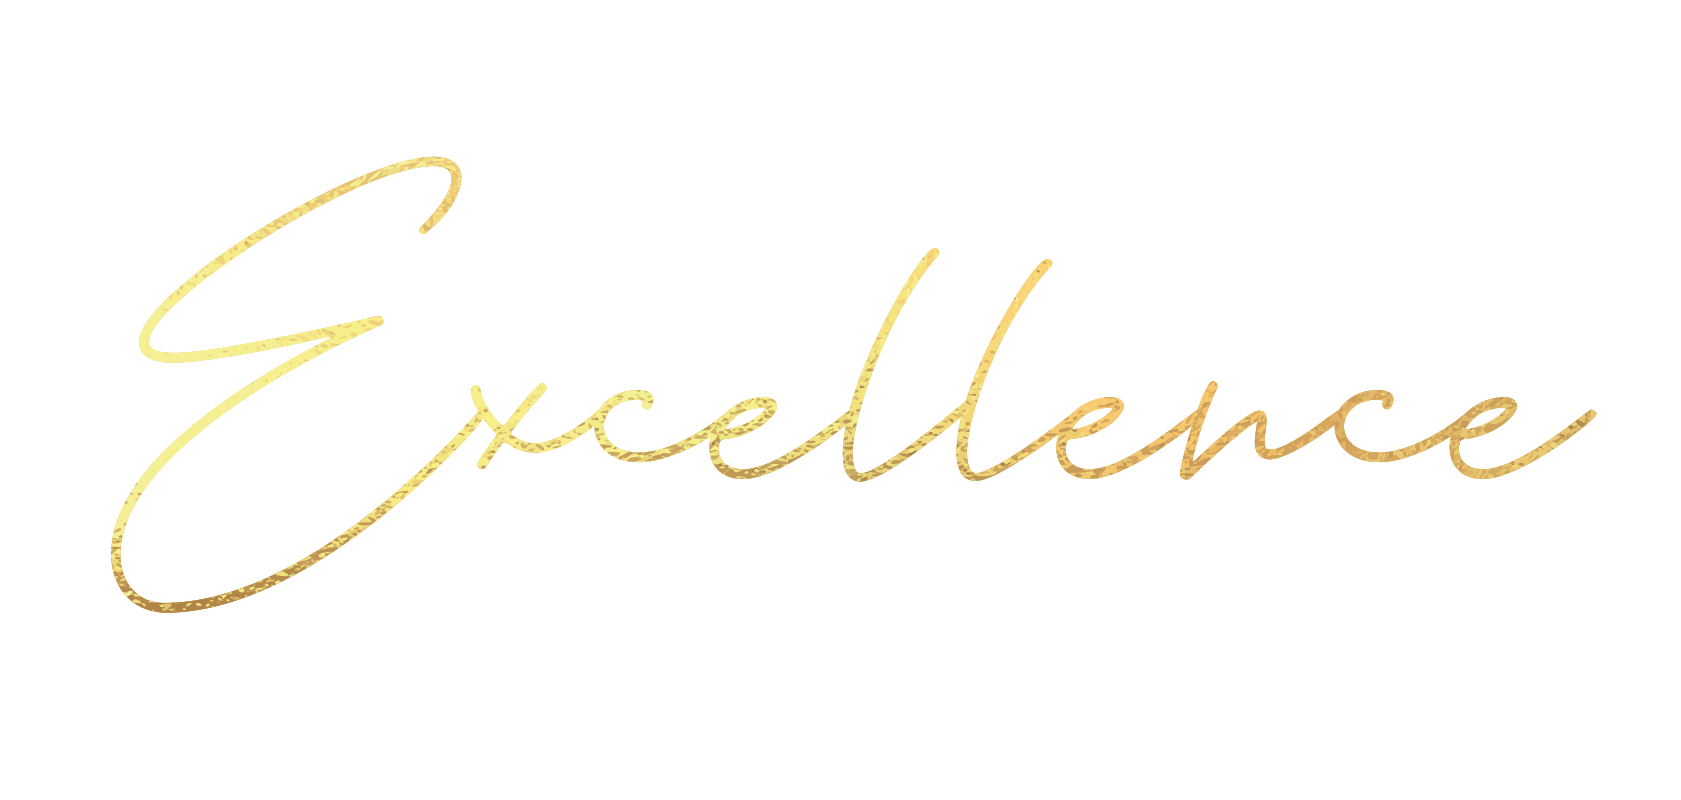 Excellence Awards 2021